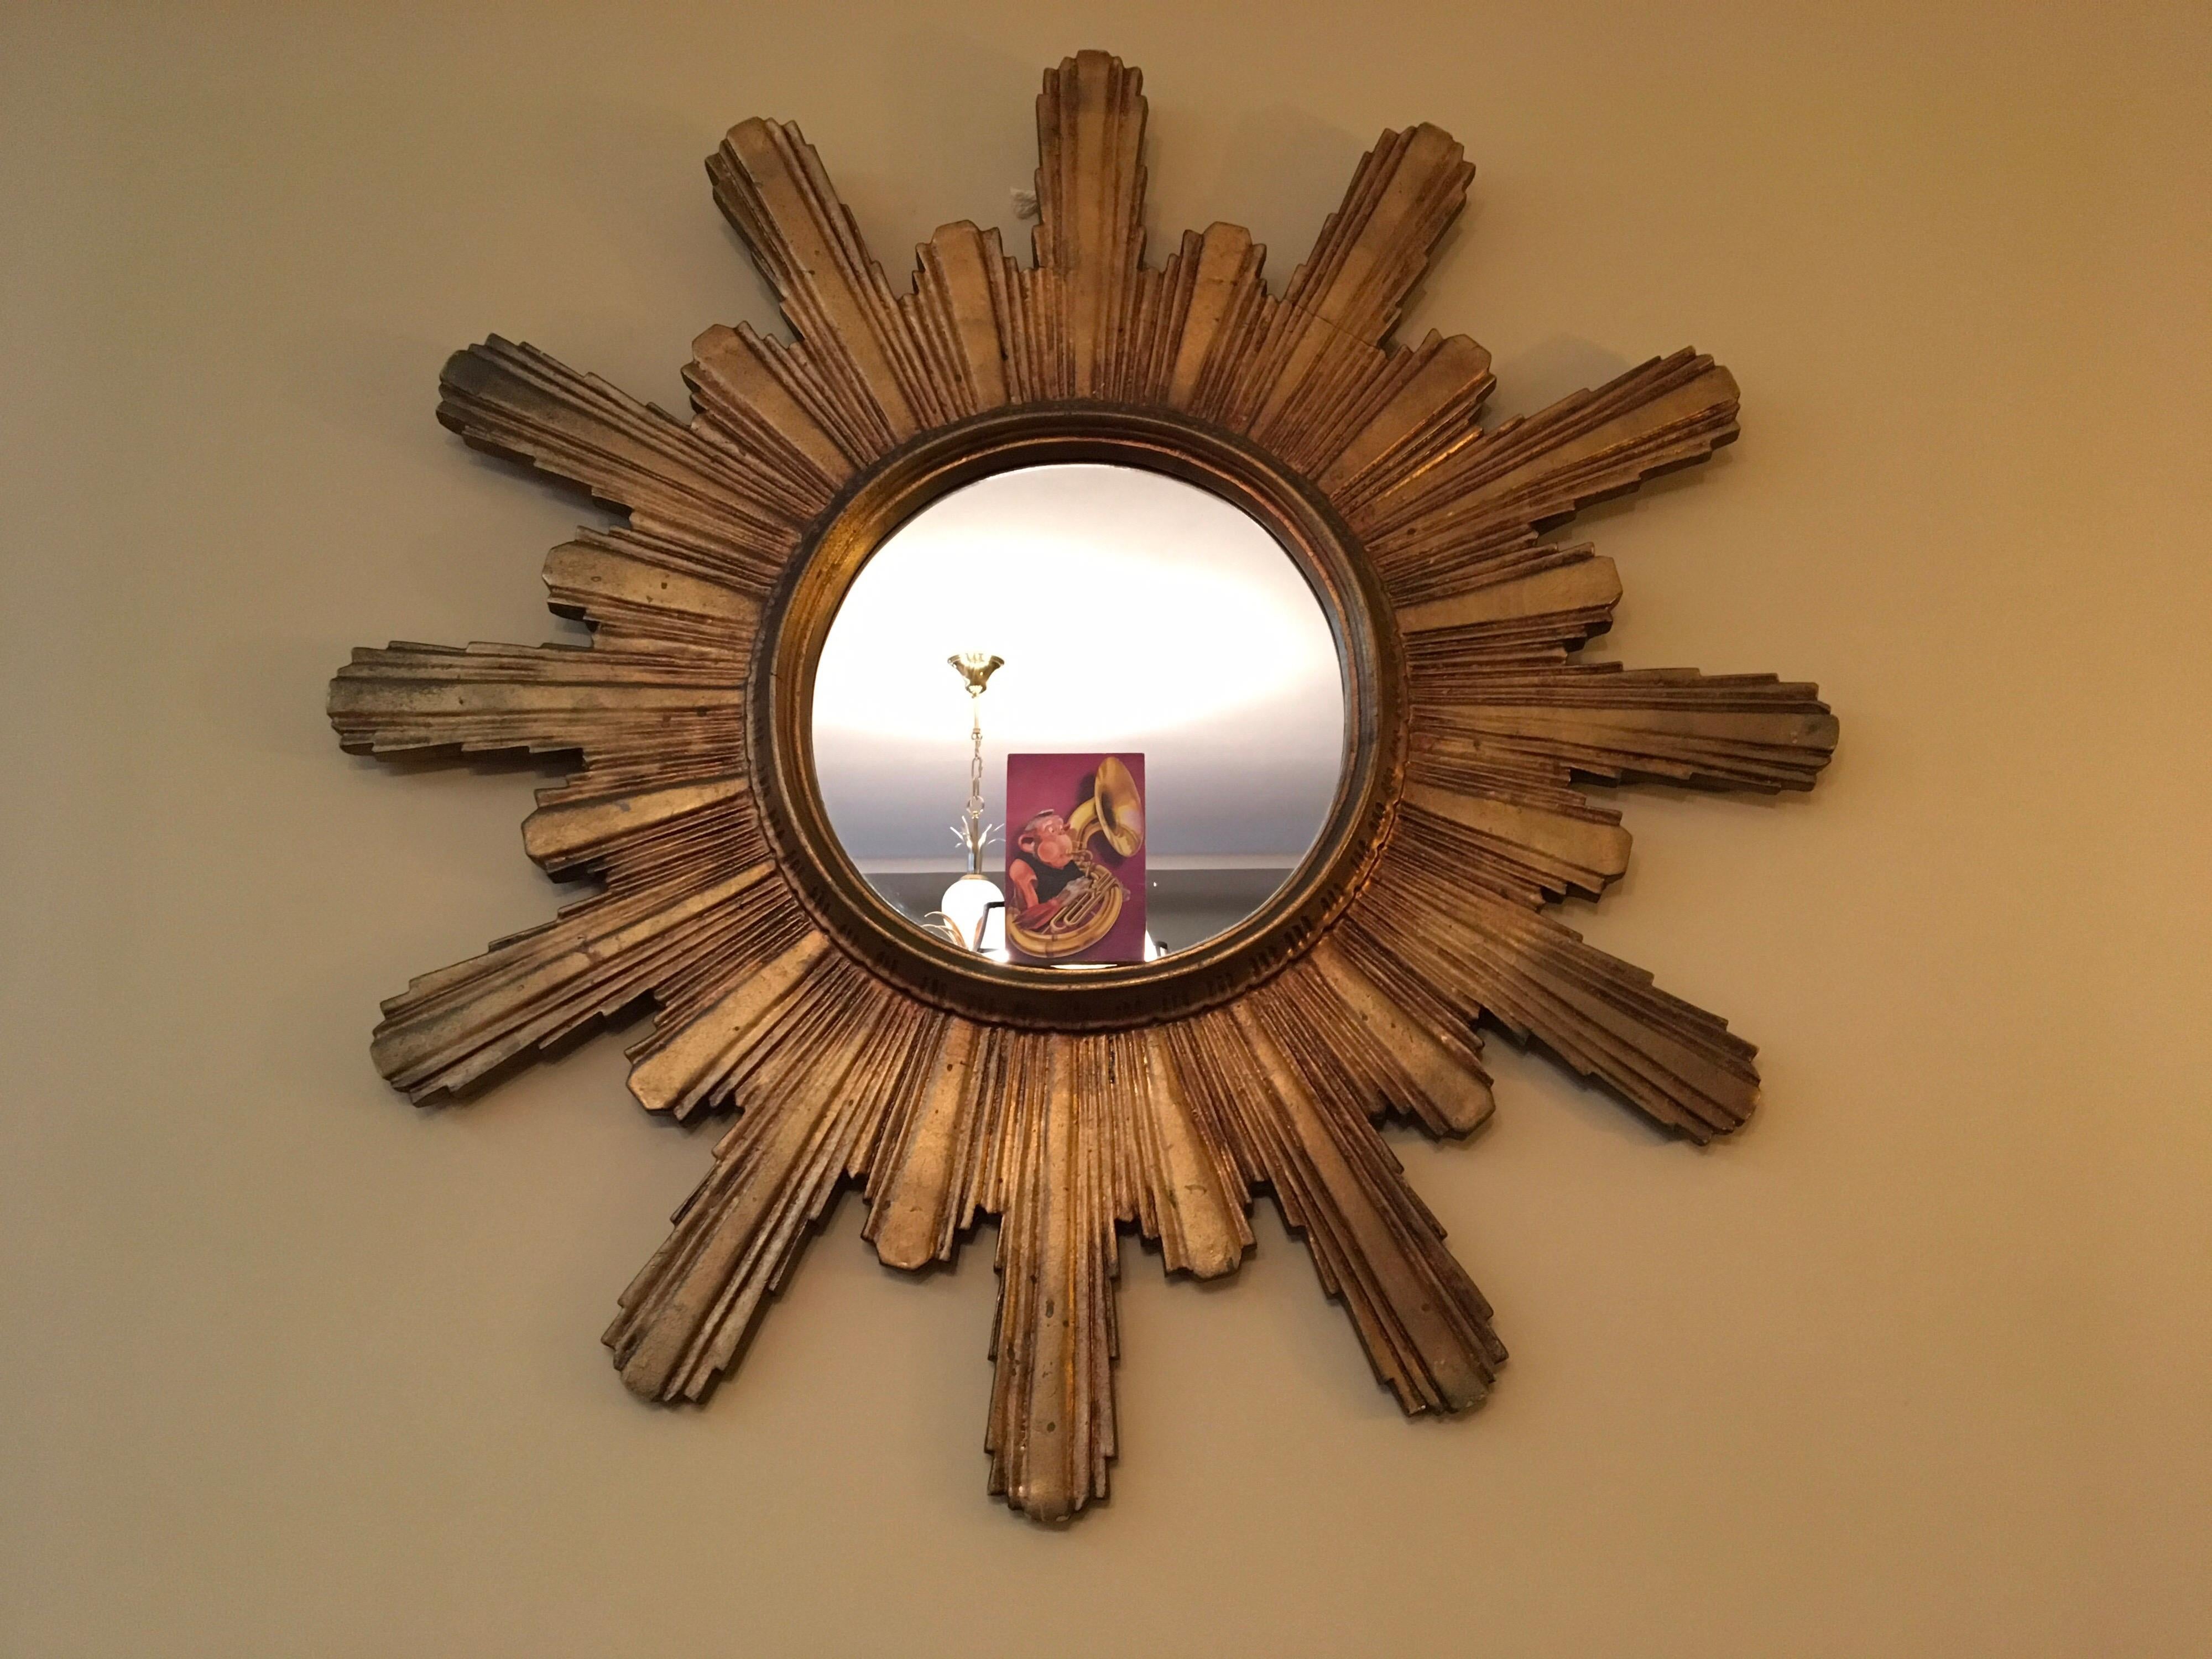 Spectacular large gilded wooden sunburst mirror or Starbust mirror. 
This 1950s mirror has a gilded carved wood frame.
Total diameter of this large wooden sunburst mirror is 39.37 inch - 100 cm!
The mirror glass is 14.17 inch - 36 cm. 

Due age and